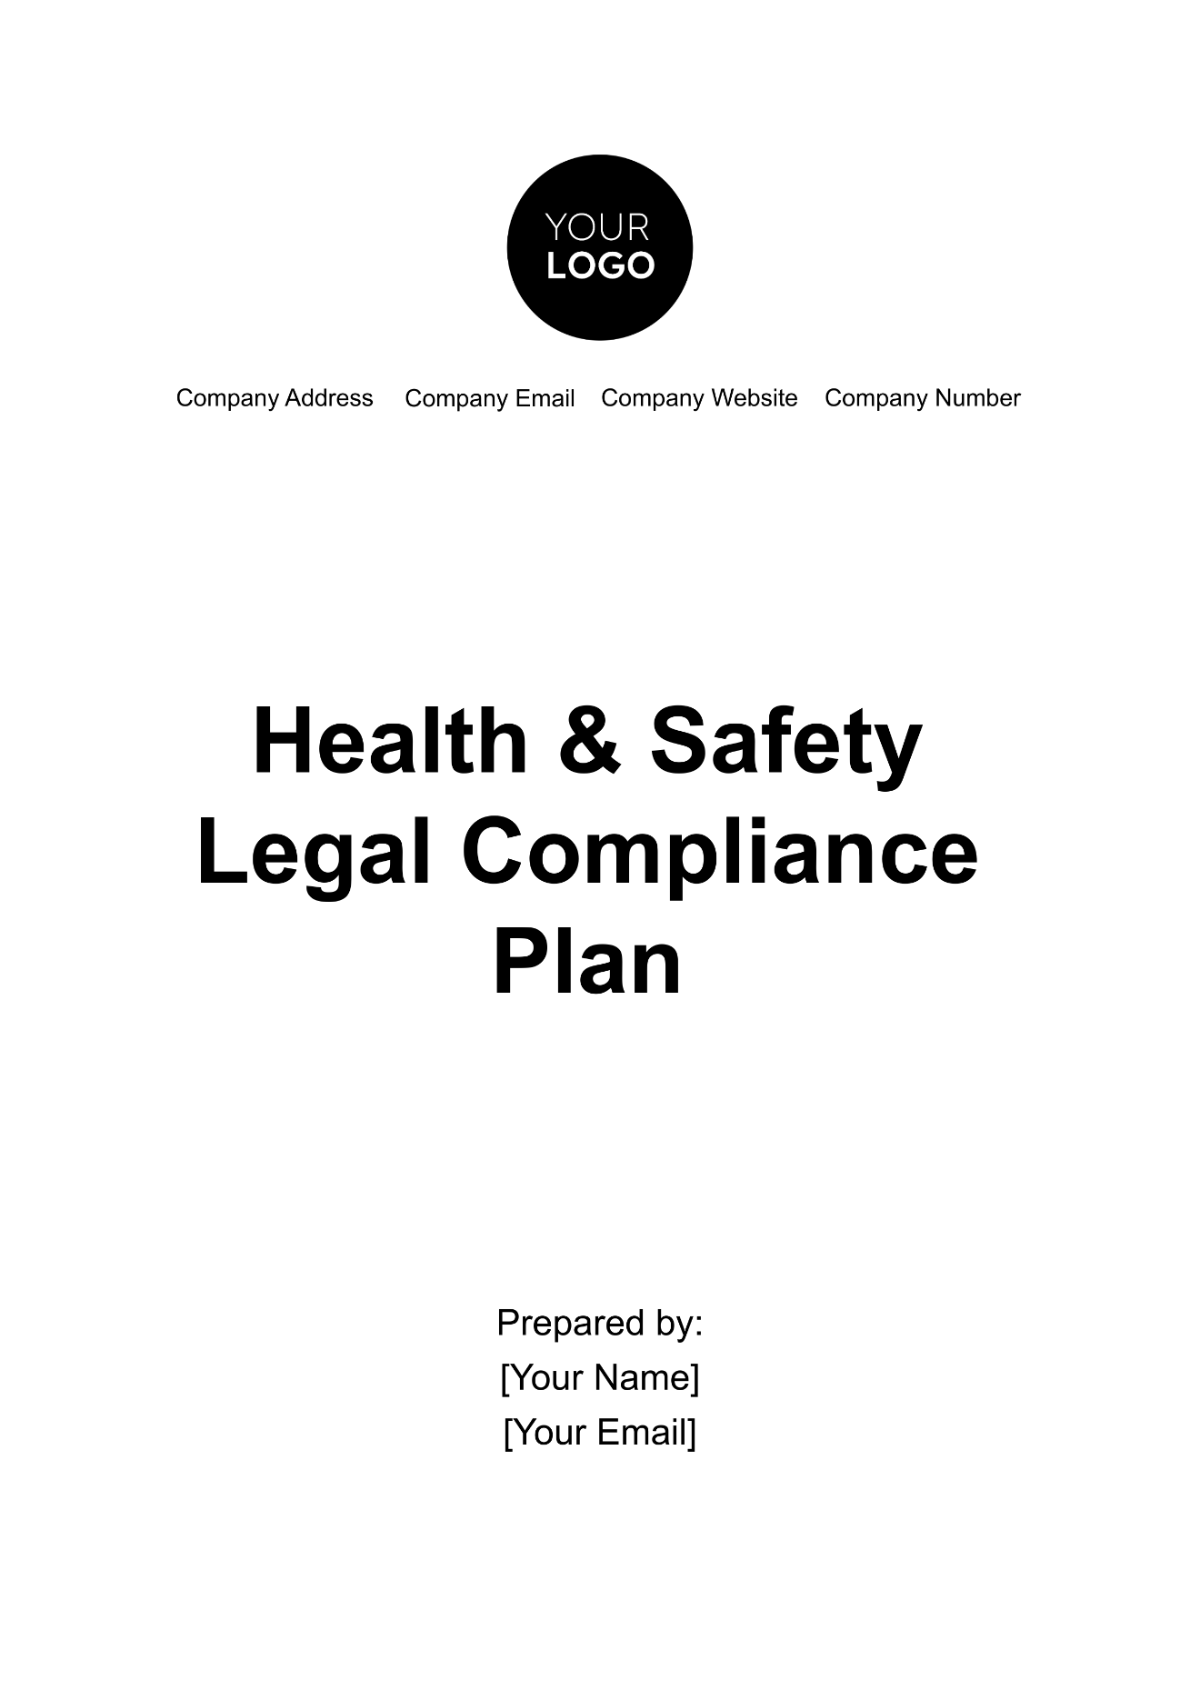 Health & Safety Legal Compliance Plan Document Template